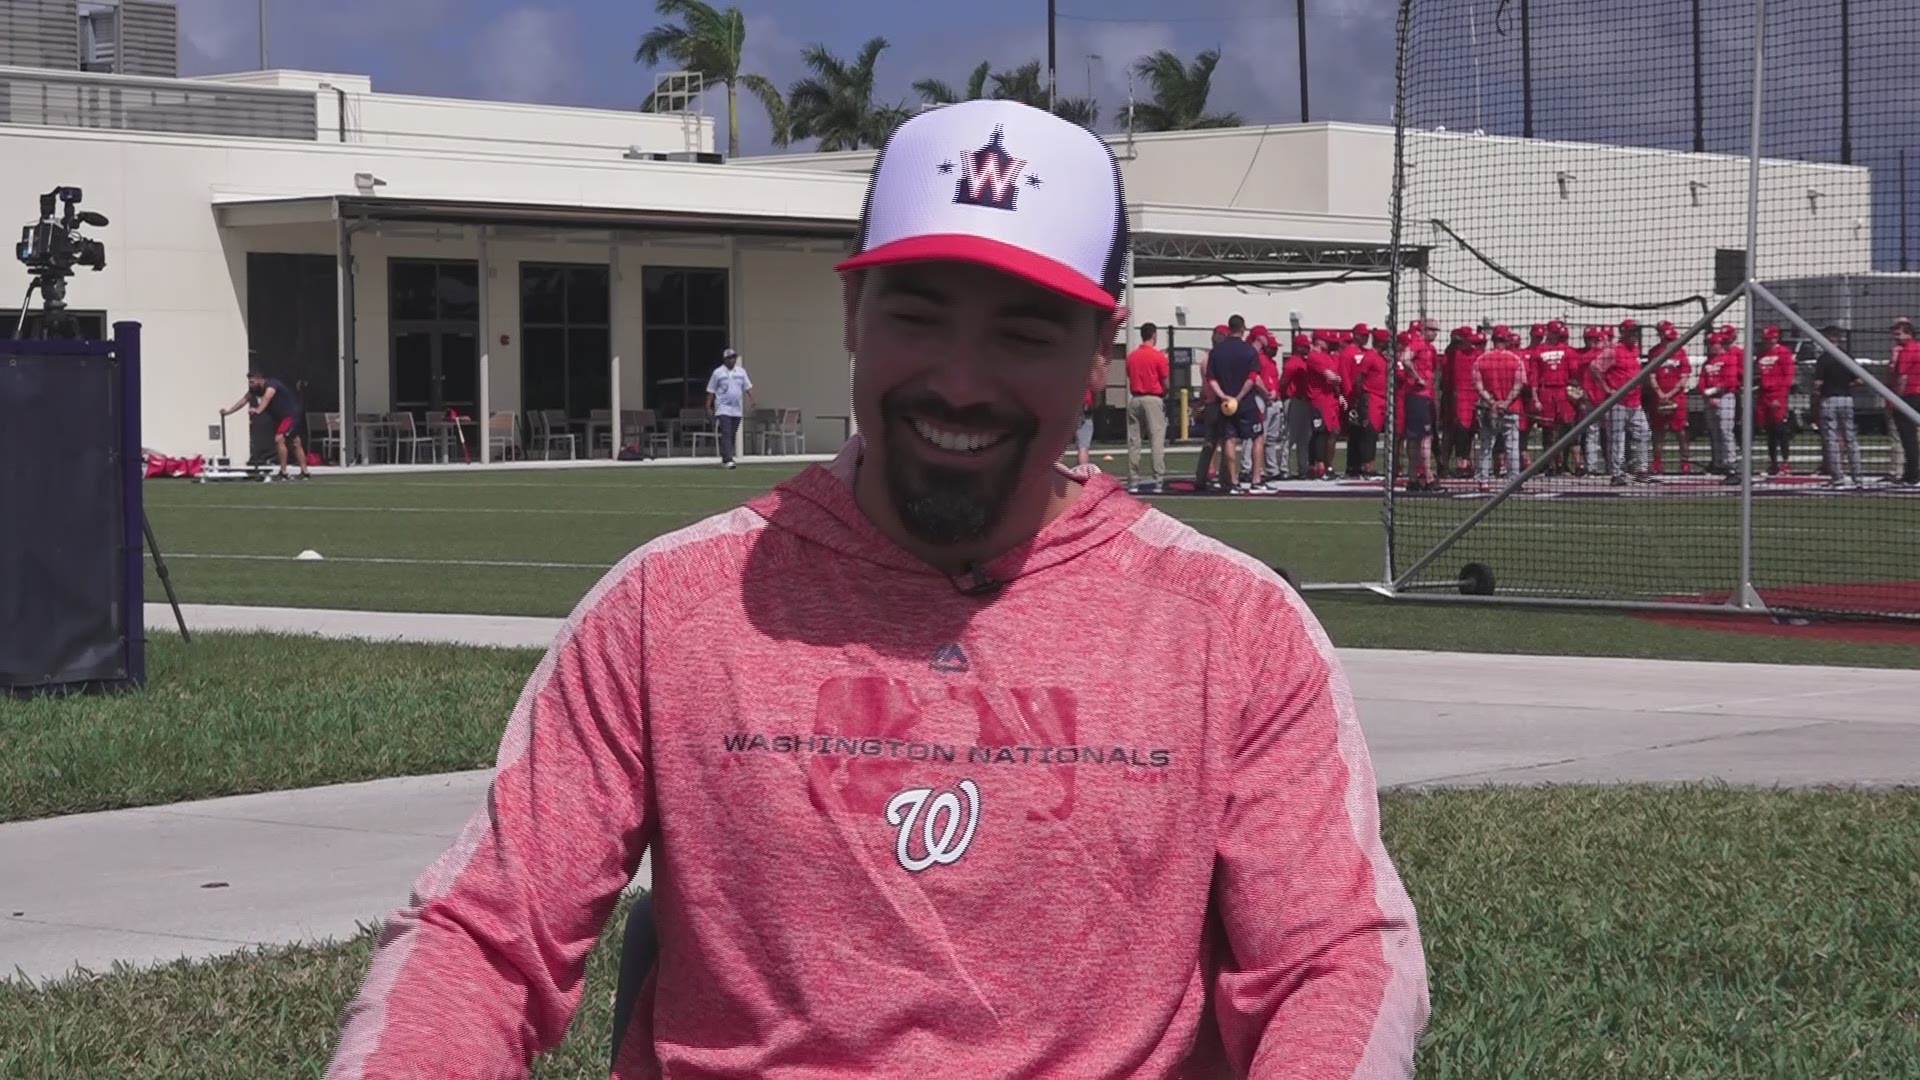 Anthony Rendon offered sympathy to Nats fans dealing with the winter weather, while Max Scherzer had a request for fans.